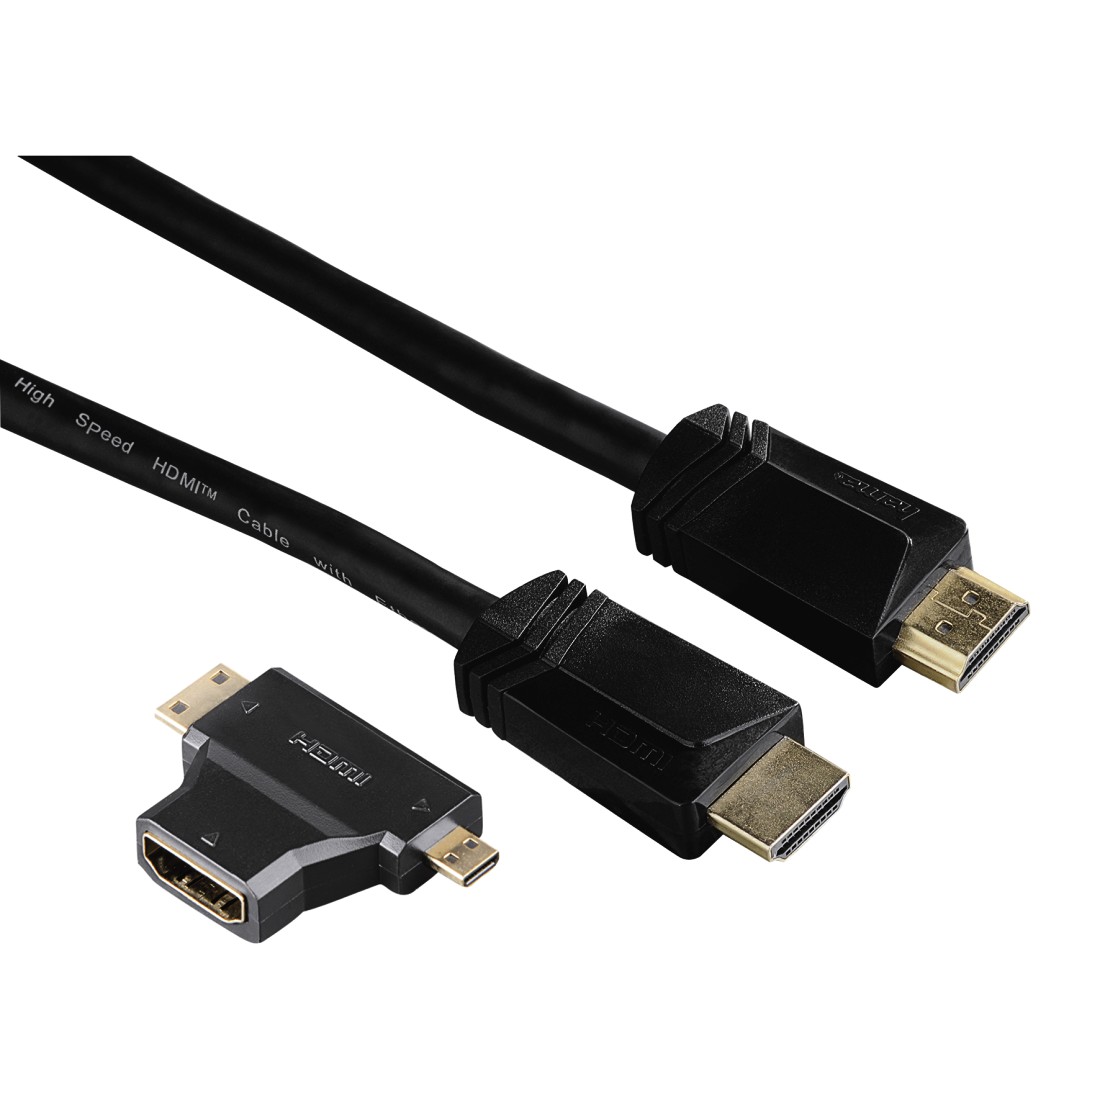 HAMA HIGH SPEED HDMI CABLE WITH ETHERNET 1.5M & HDMI ADAPTER